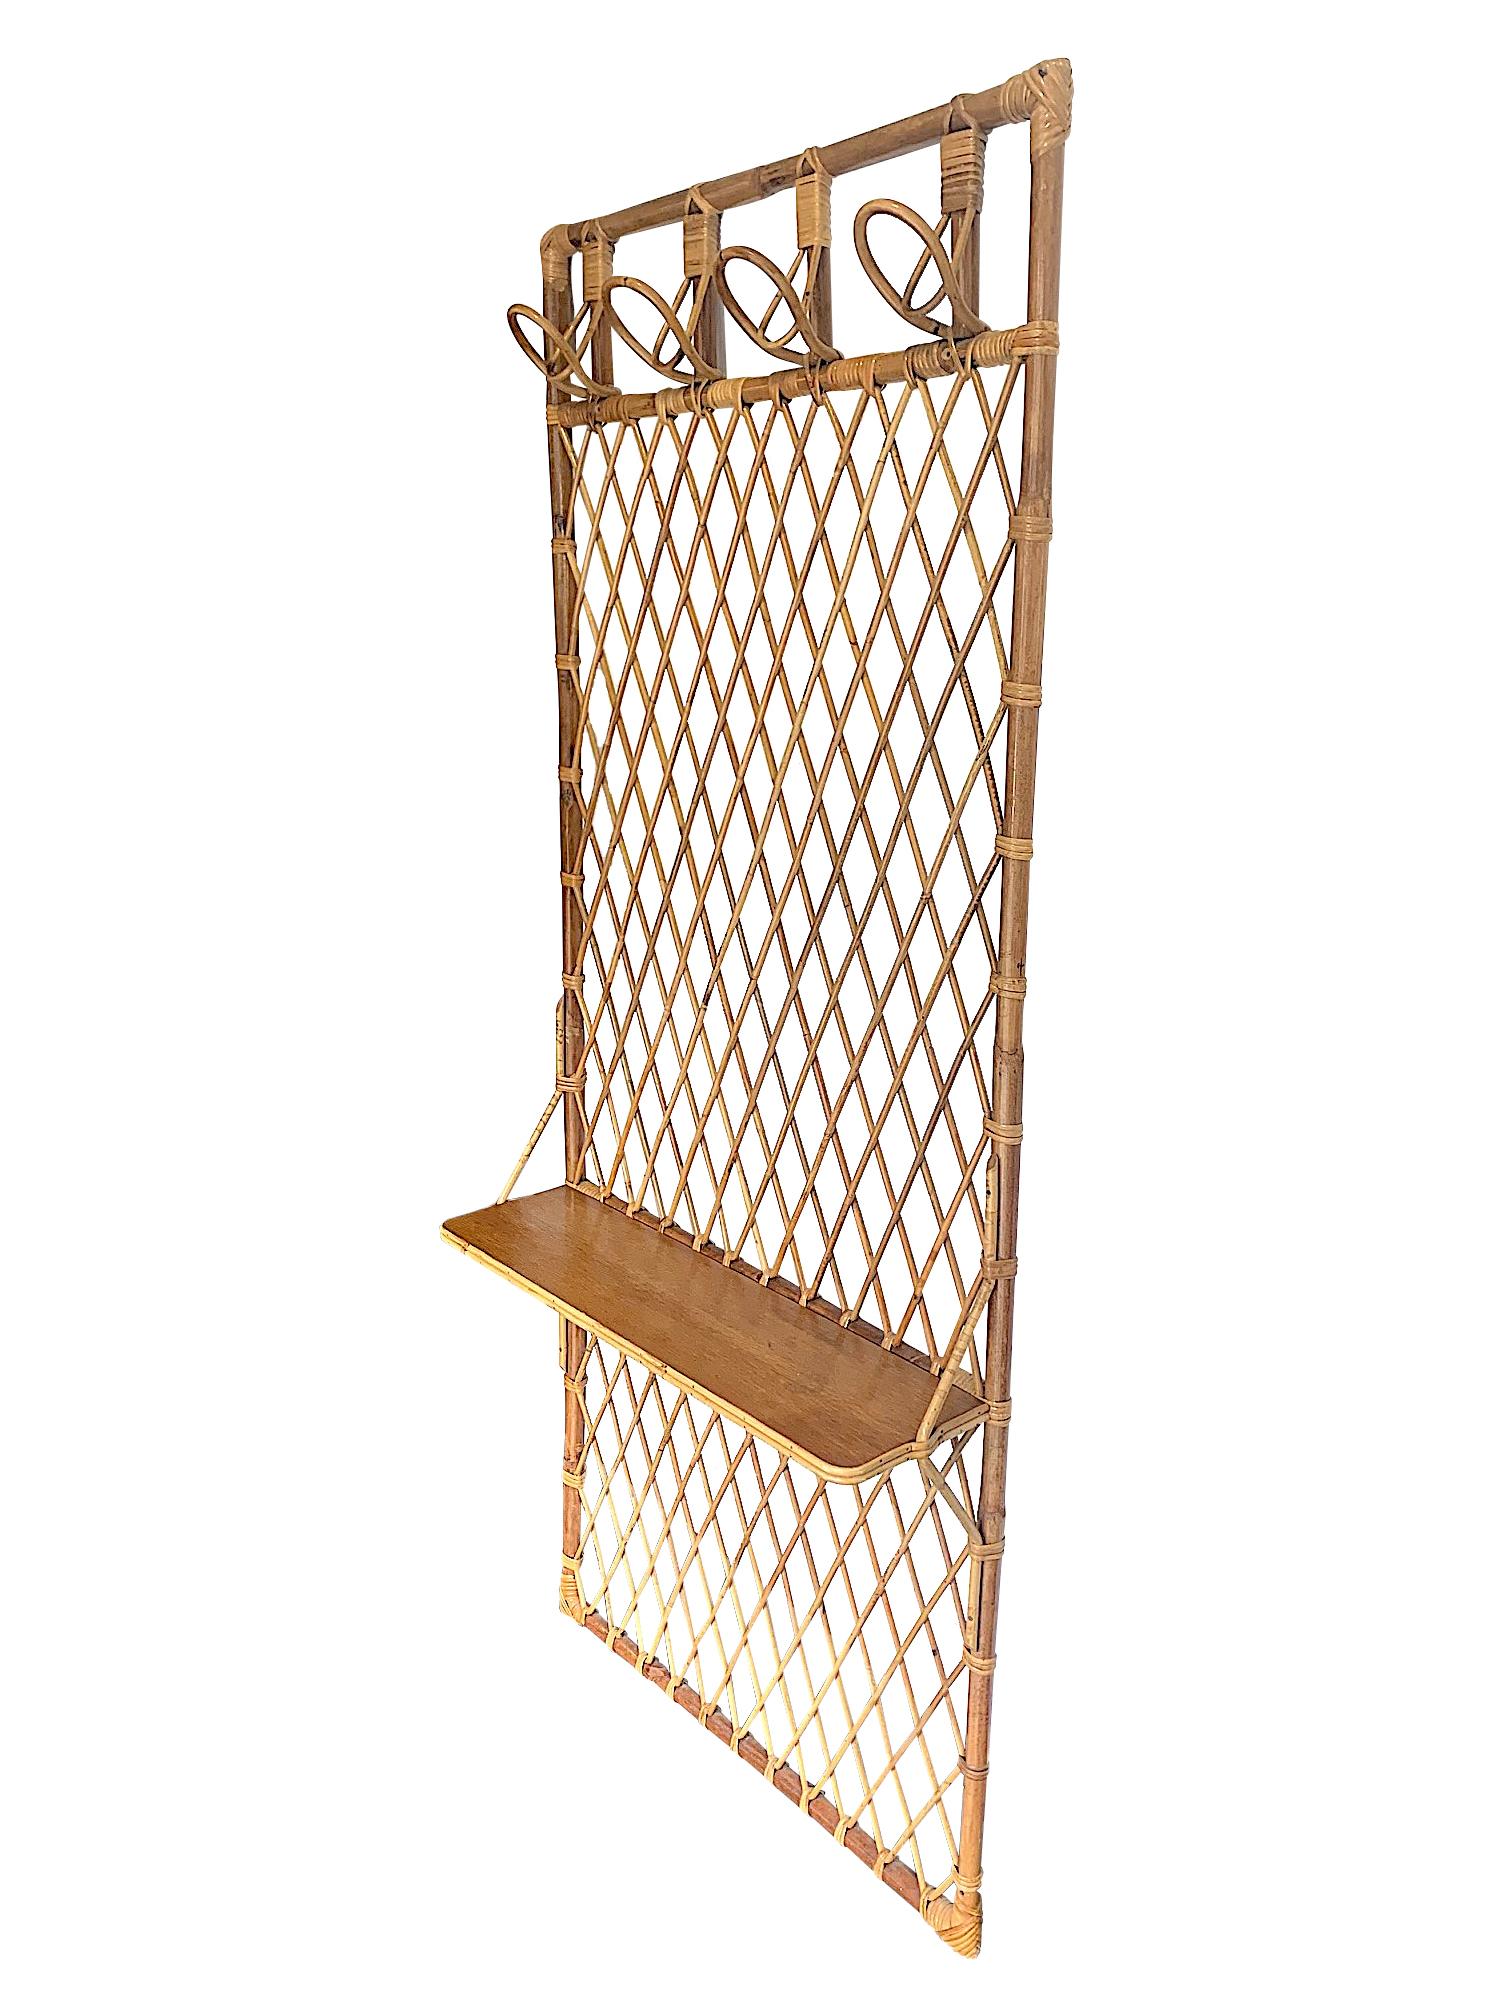 A 1970s French Riviera rattan and bamboo coat rack with four coat hooks, wooden shelf and geometric woven rattan back.